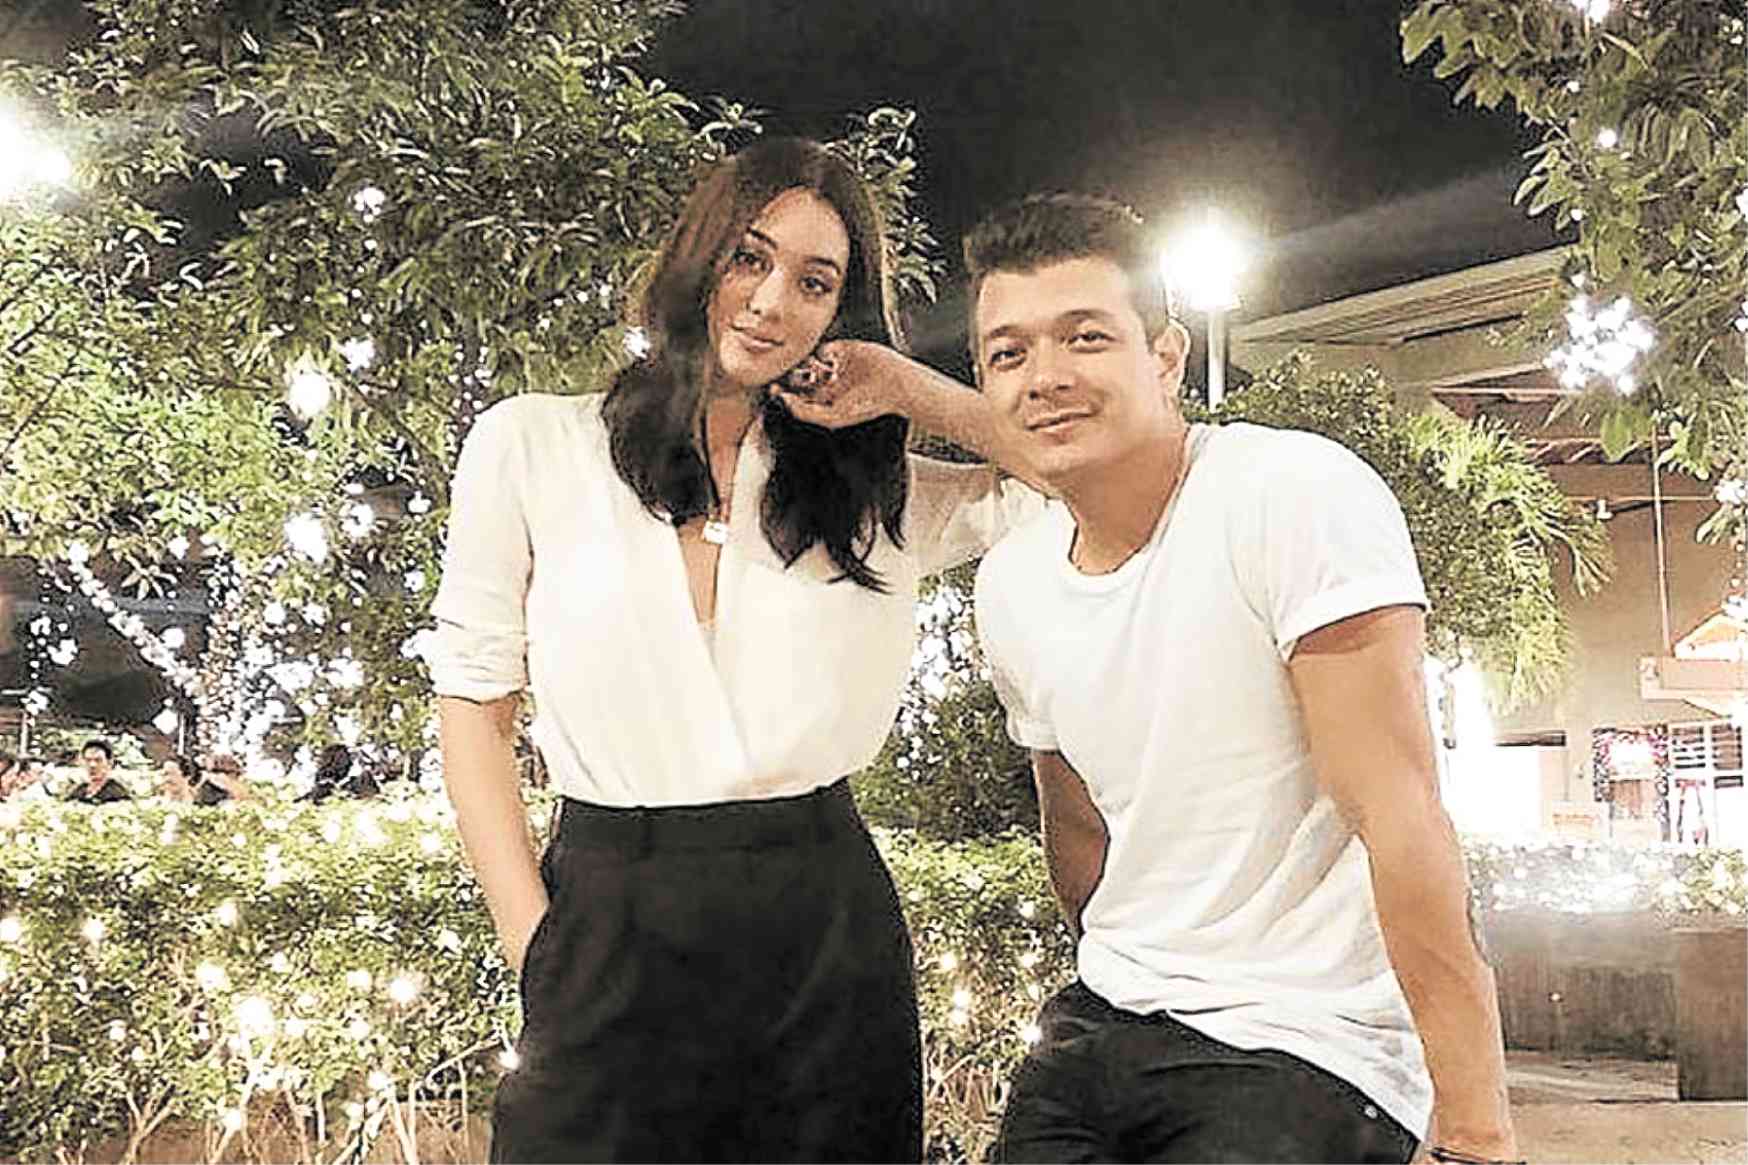 Jericho Rosales Reveals Why He and Kim Jones Aren't Ready to Have a Child  Yet